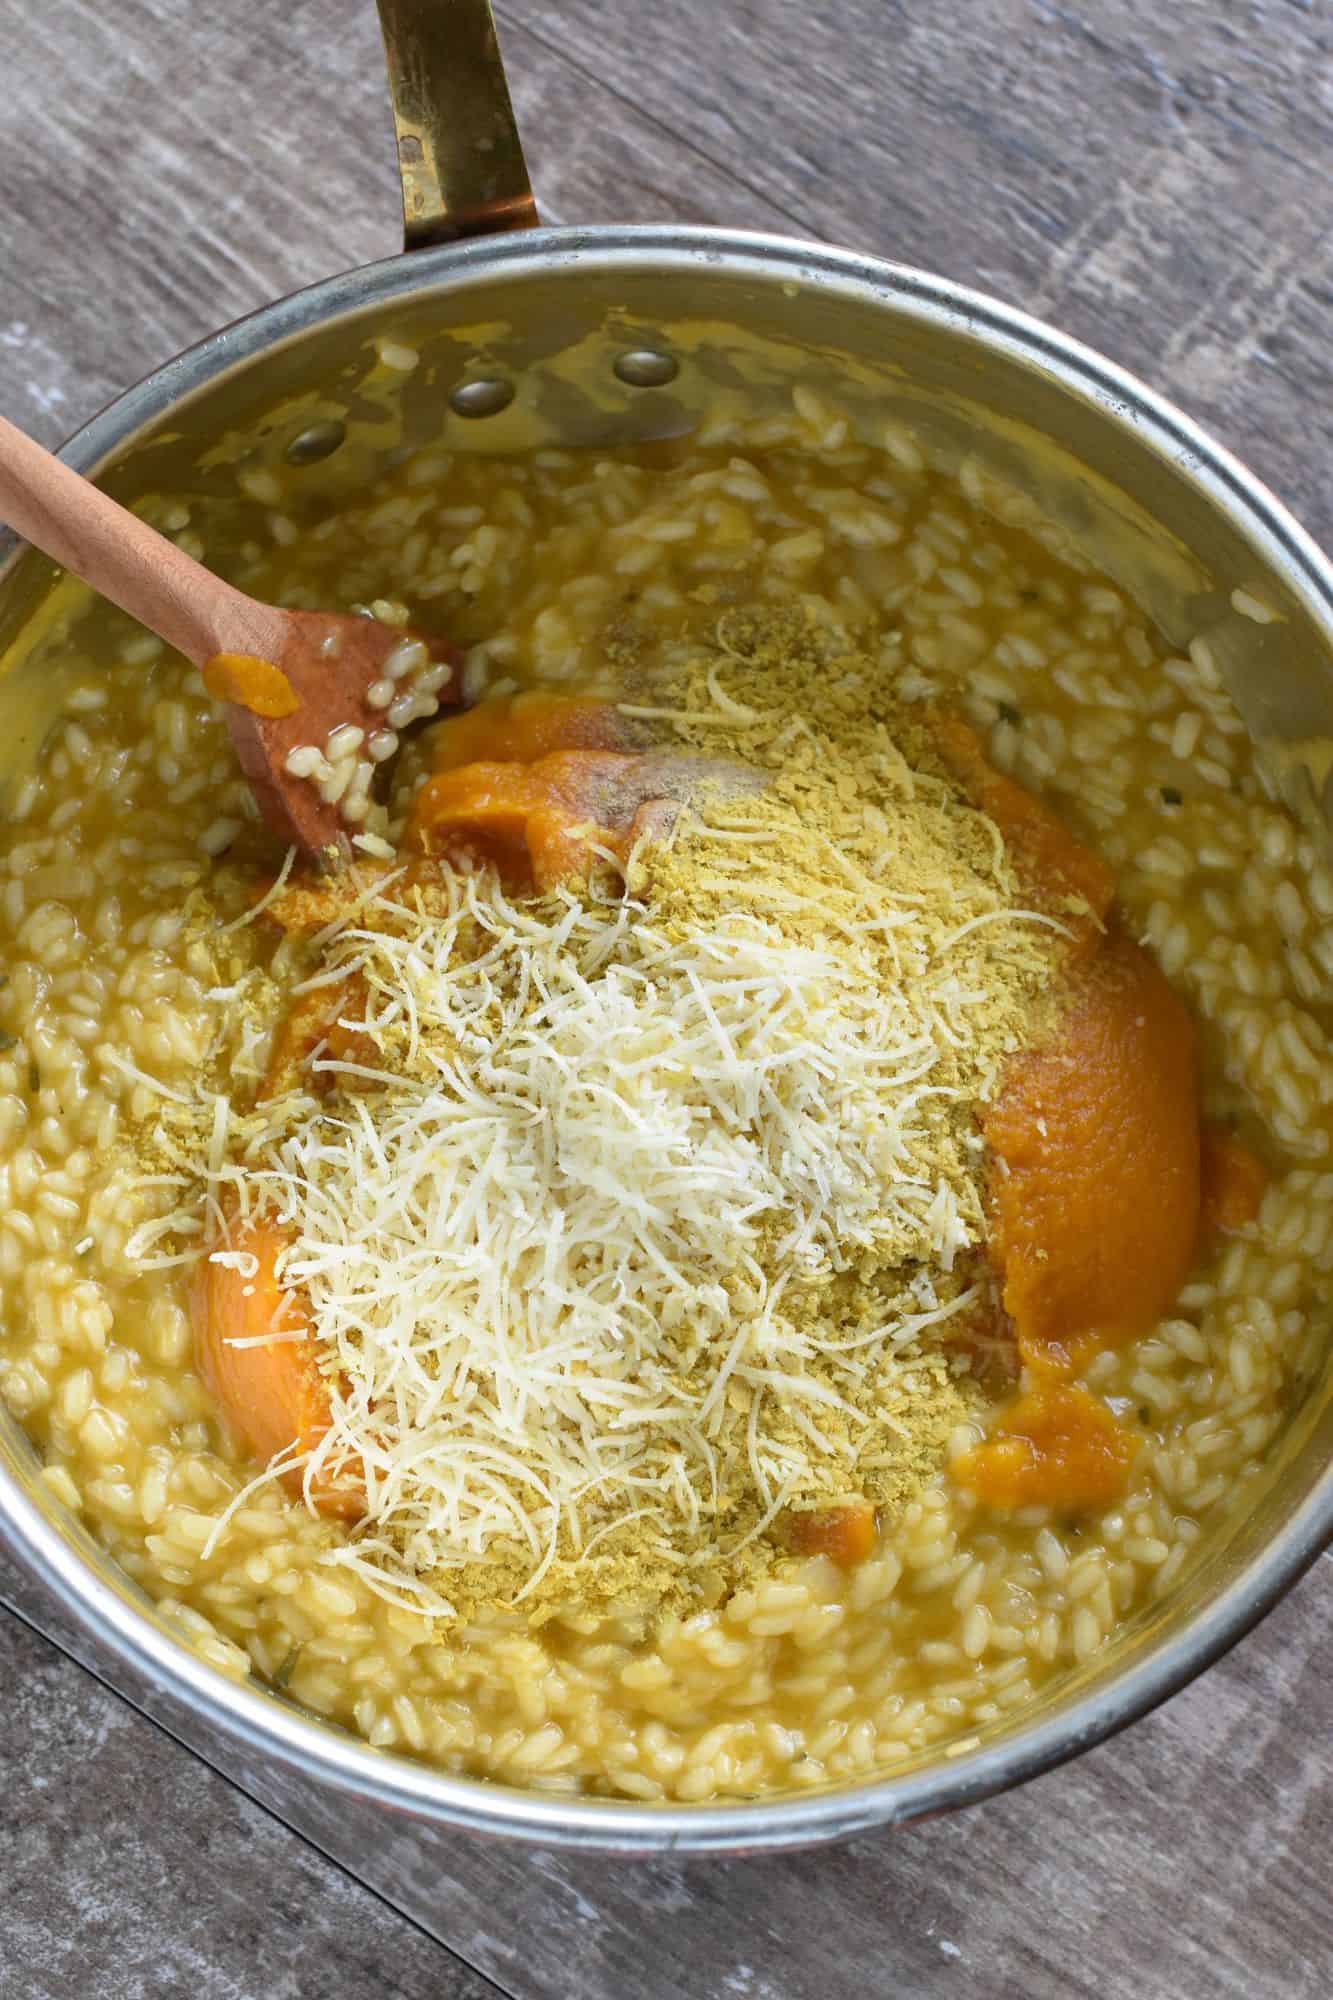 Pumpkin puree, vegan Parmesan, nutritional yeast, nutmeg and white pepper added to the risotto